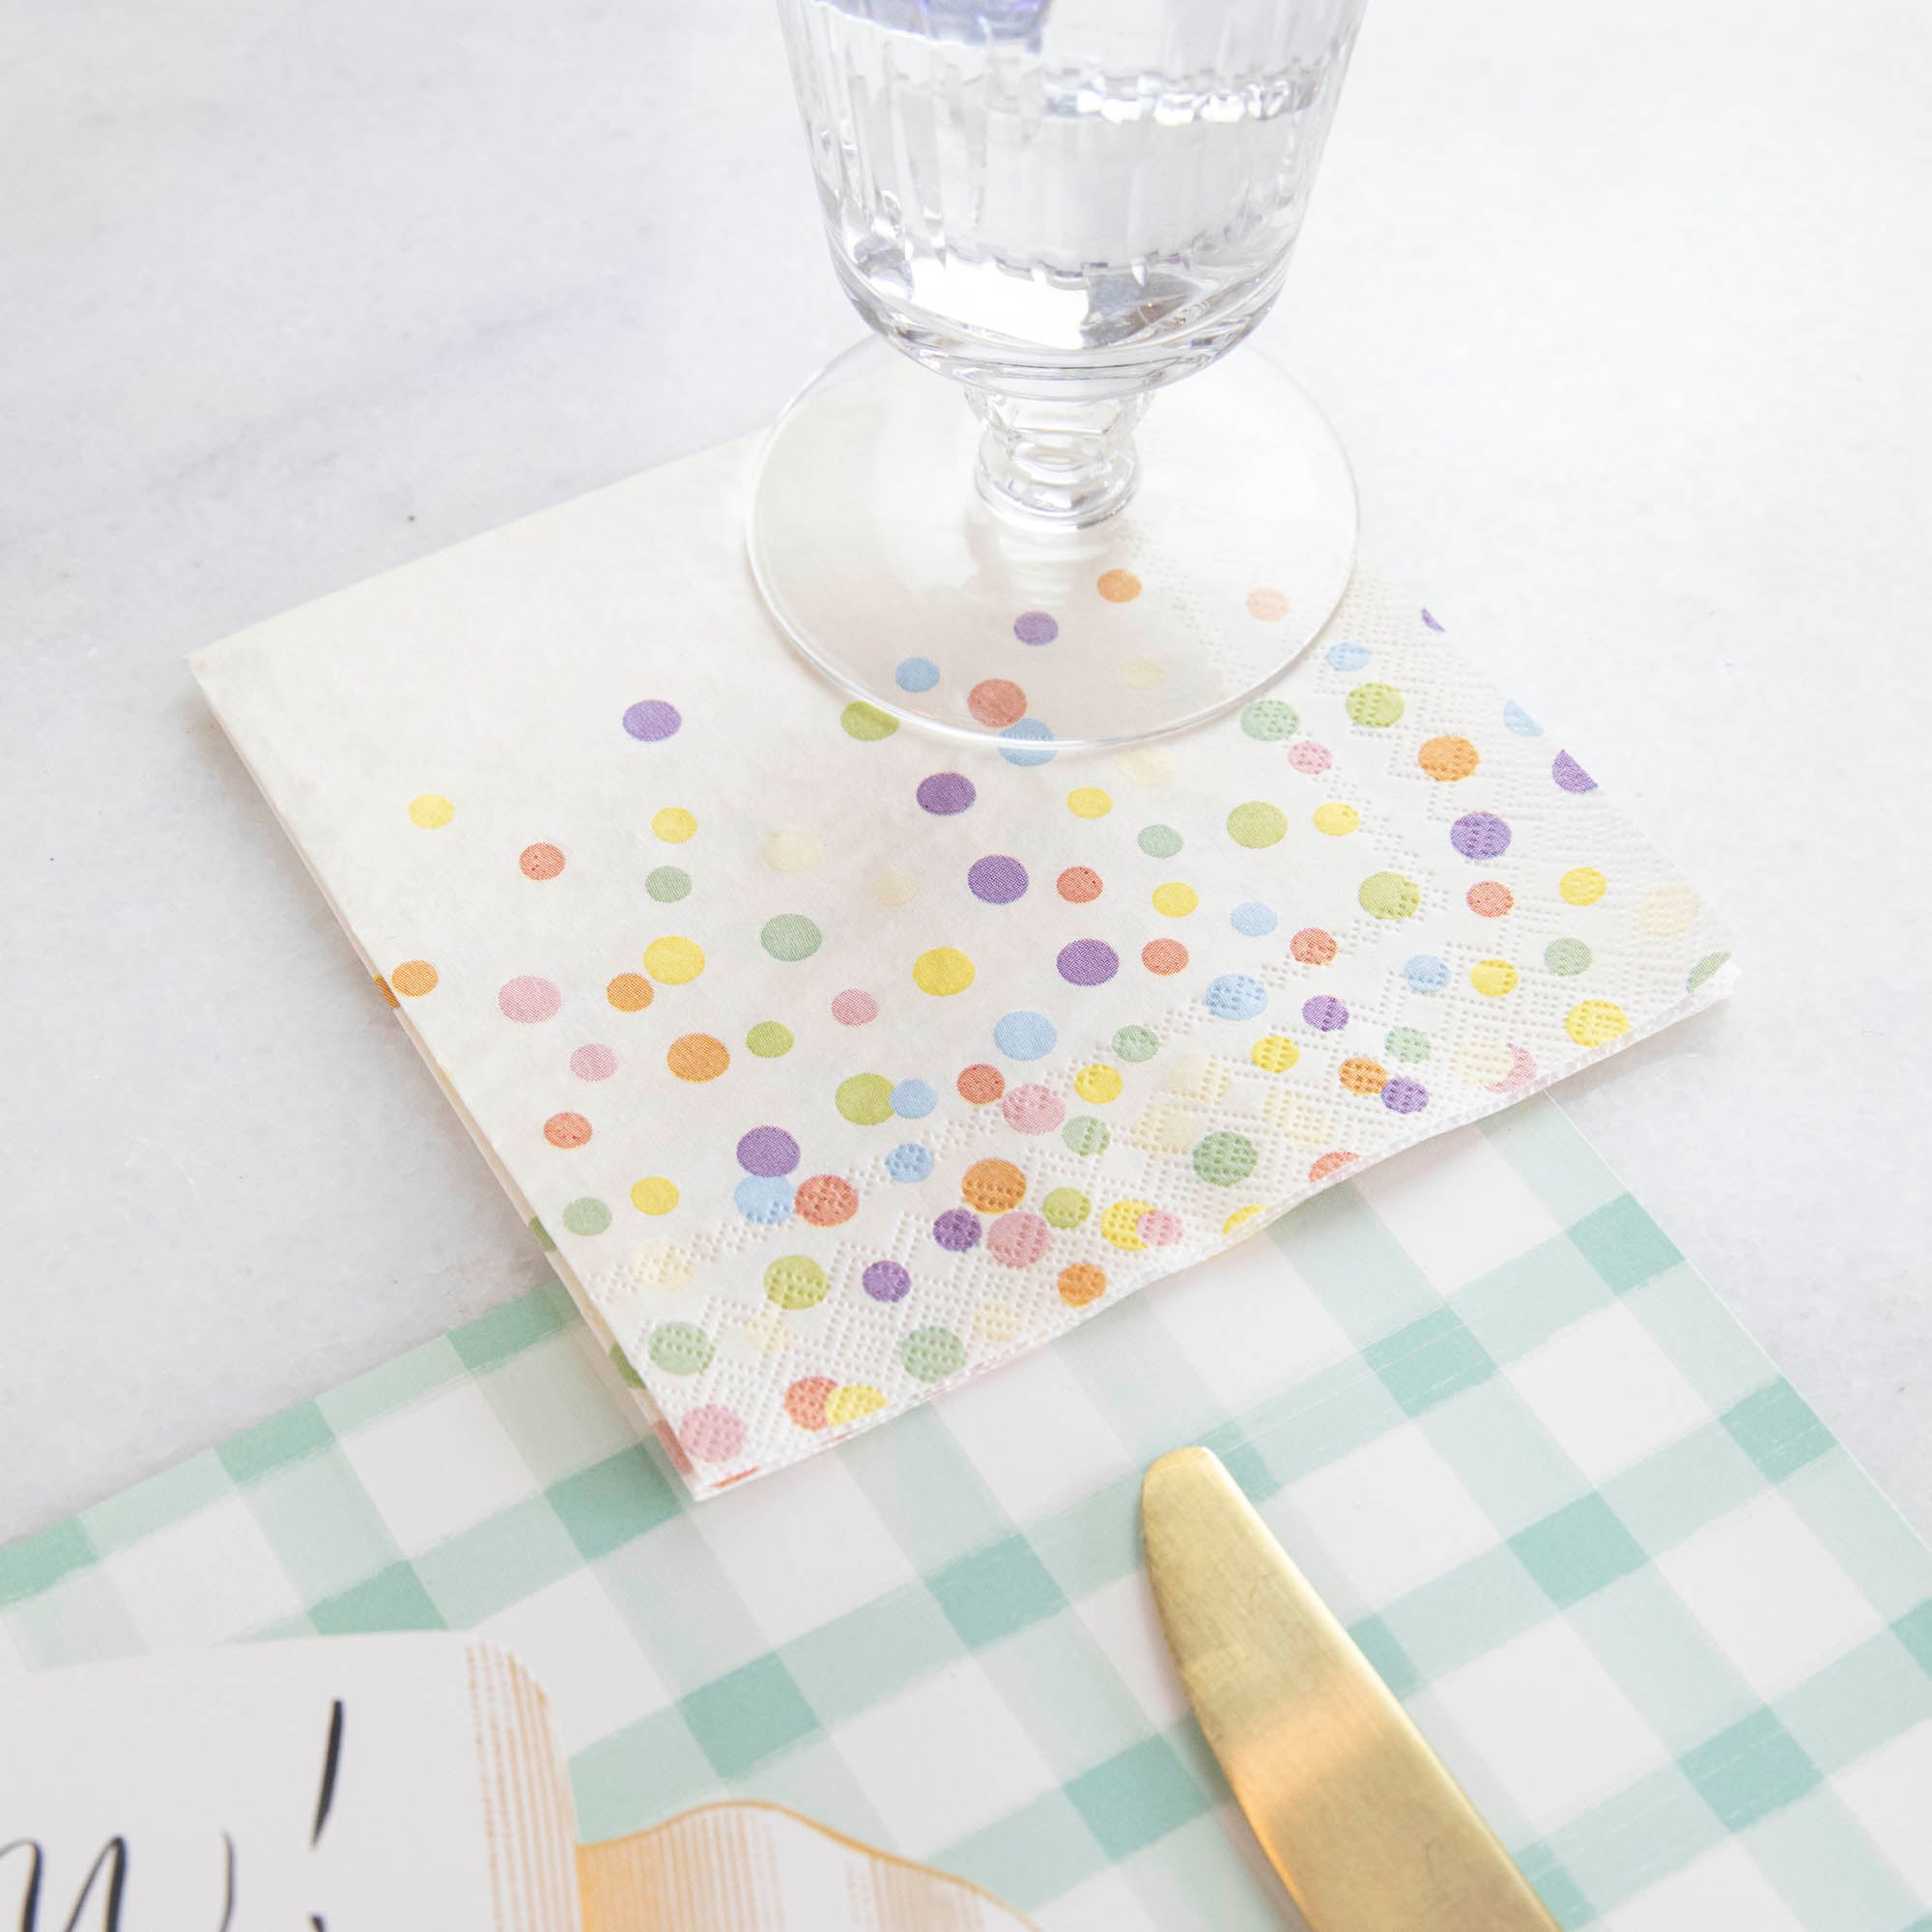 A Confetti Sprinkles Cocktail Napkin under a full water glass on an elegant place setting.